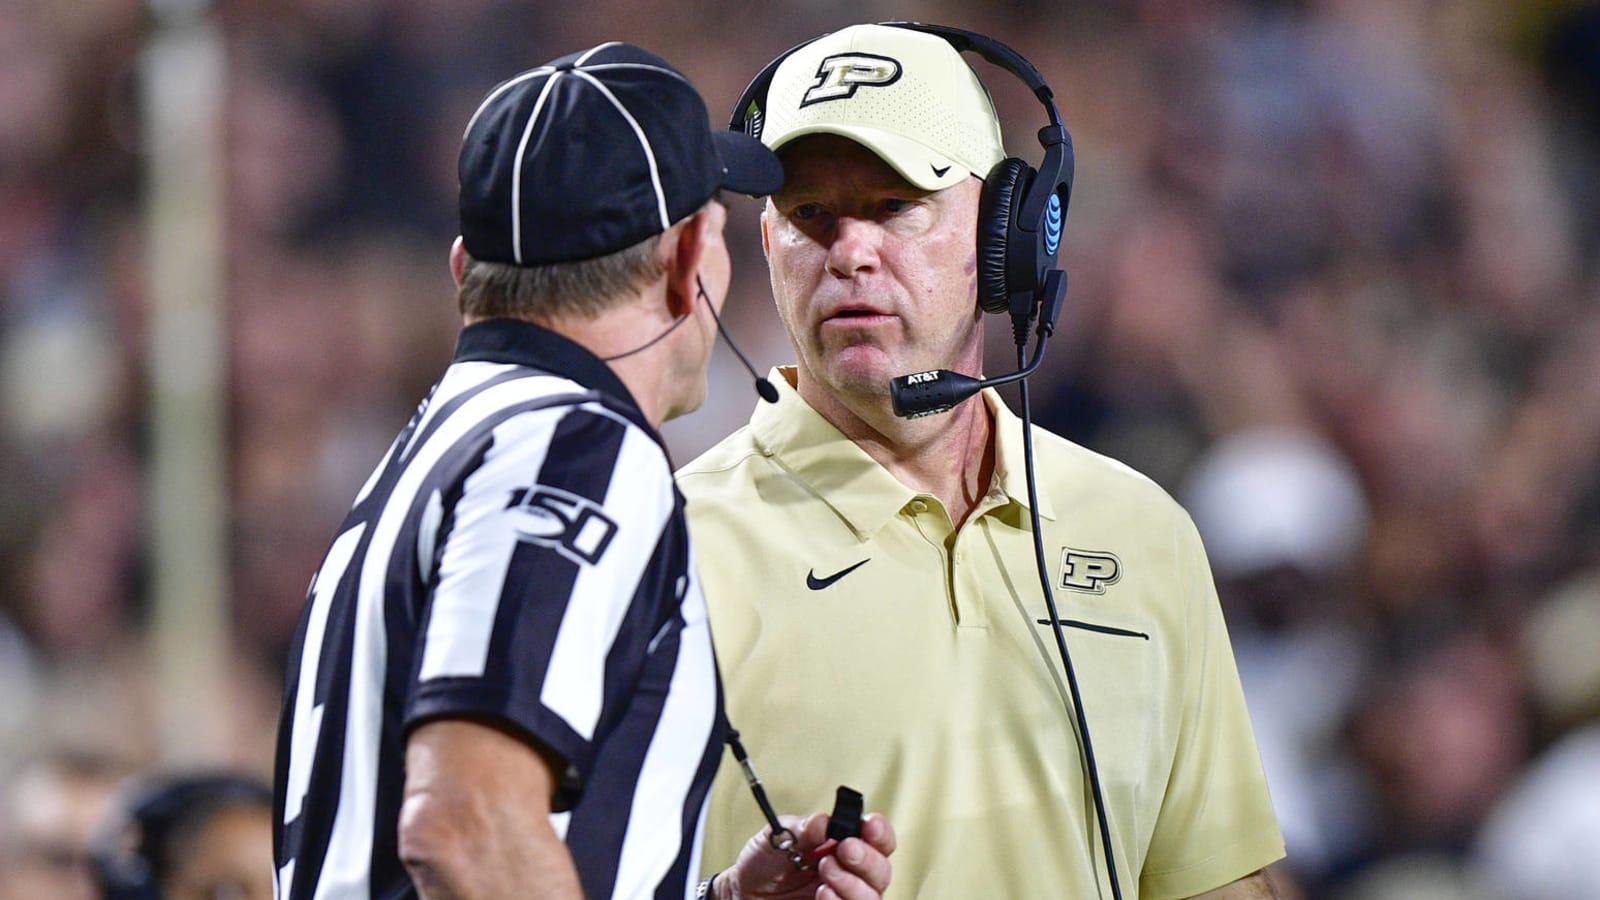 Jeff Brohm livid after Purdue robbed of TD by OPI penalty